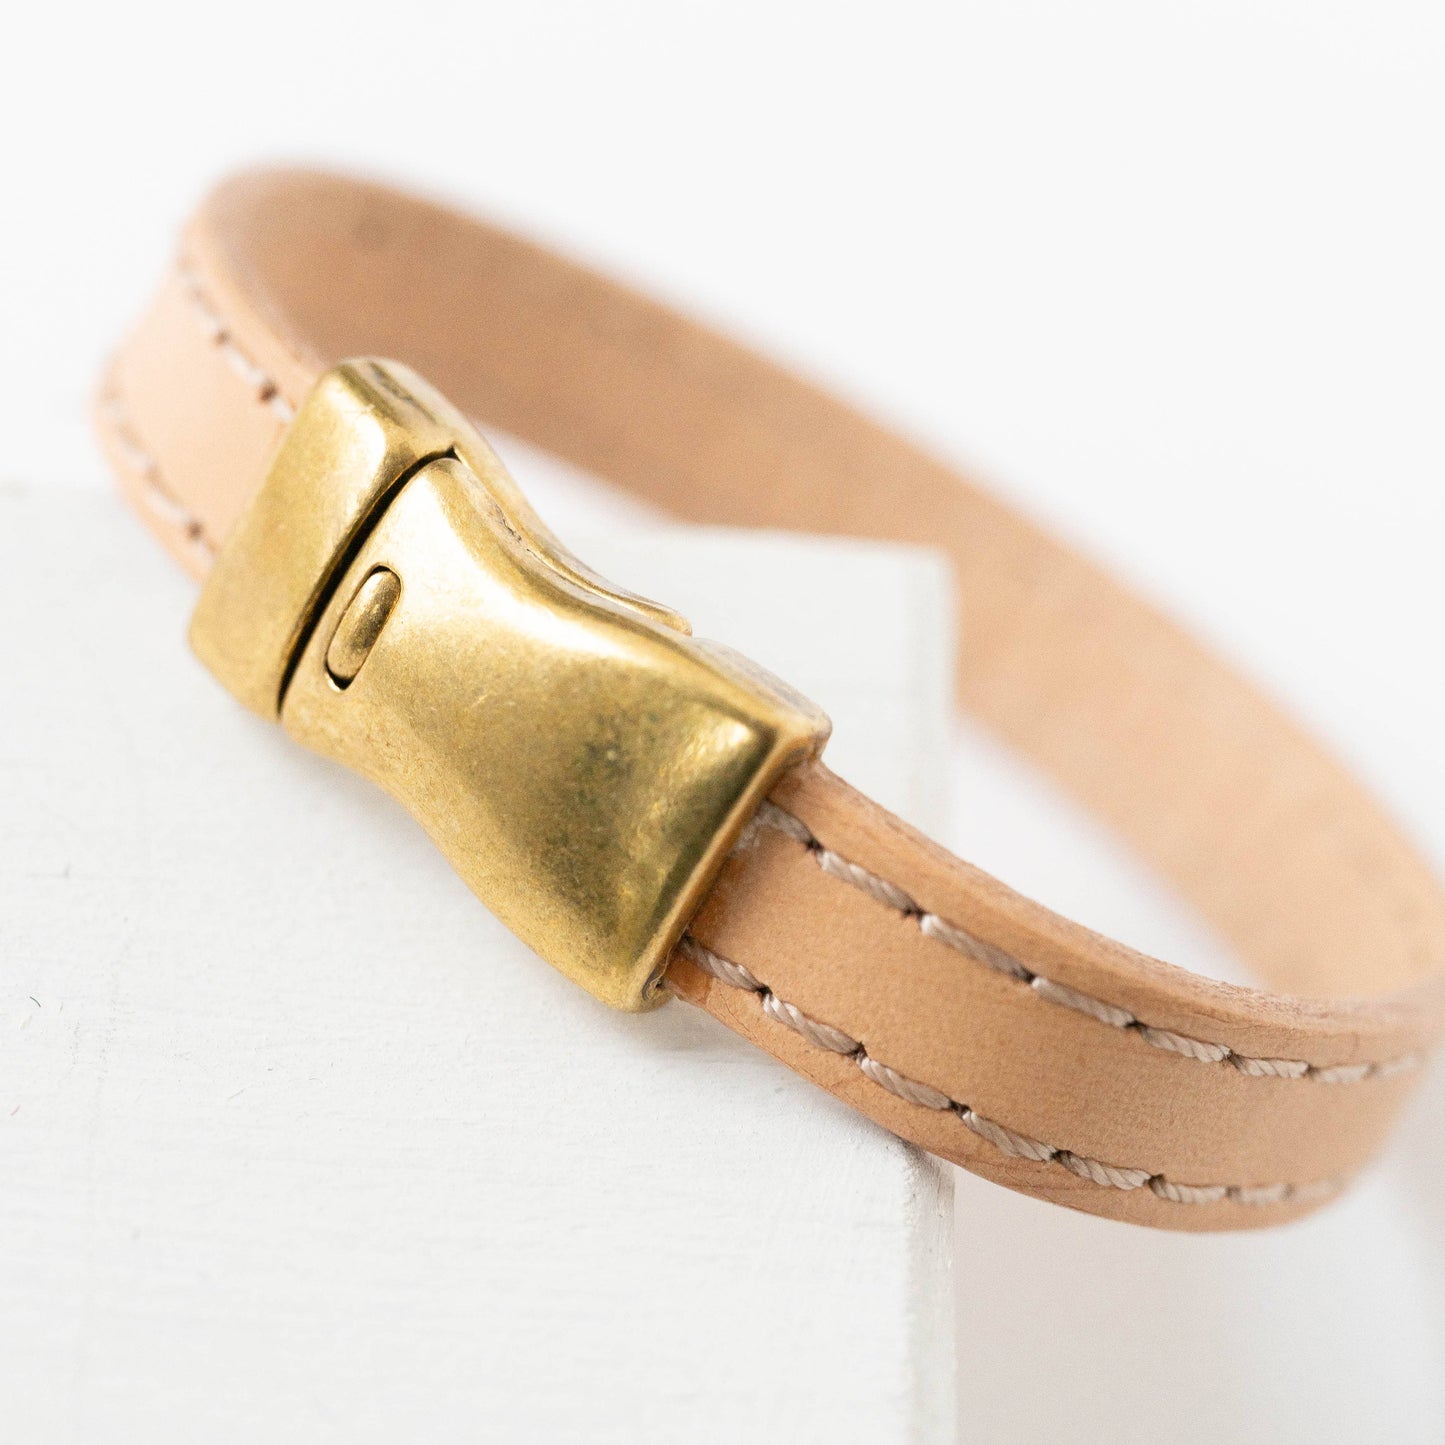 Nest Pretty Things Stitched Leather Magnetic Bracelet